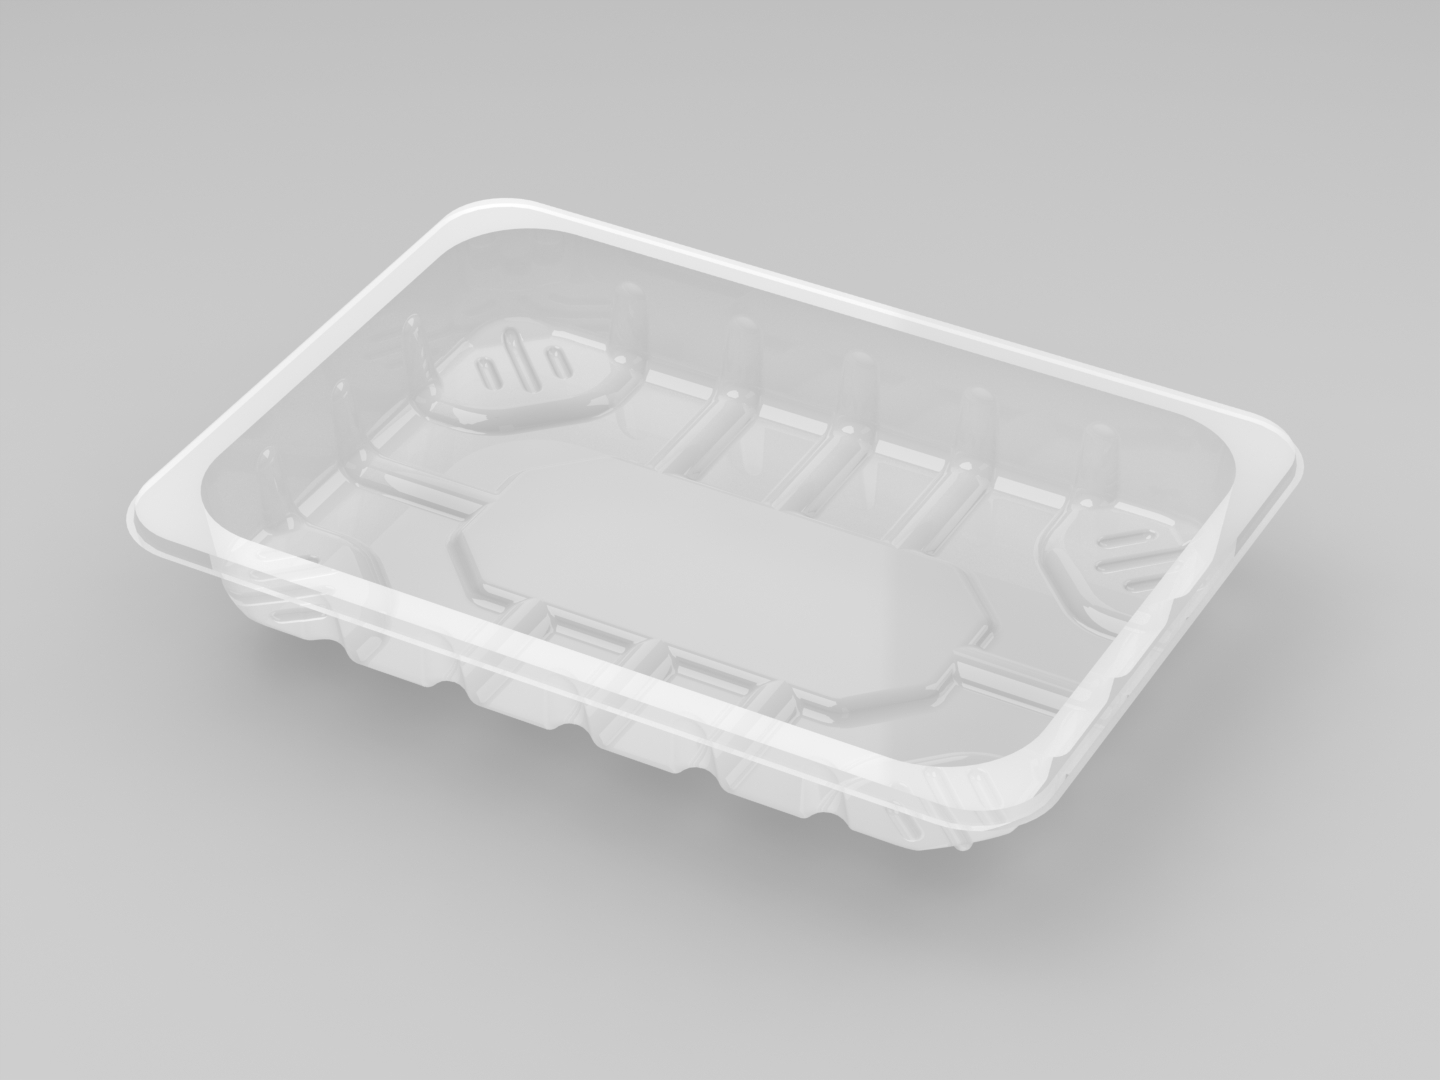 2 Series Meat Produce Tray (25mm)
	
		